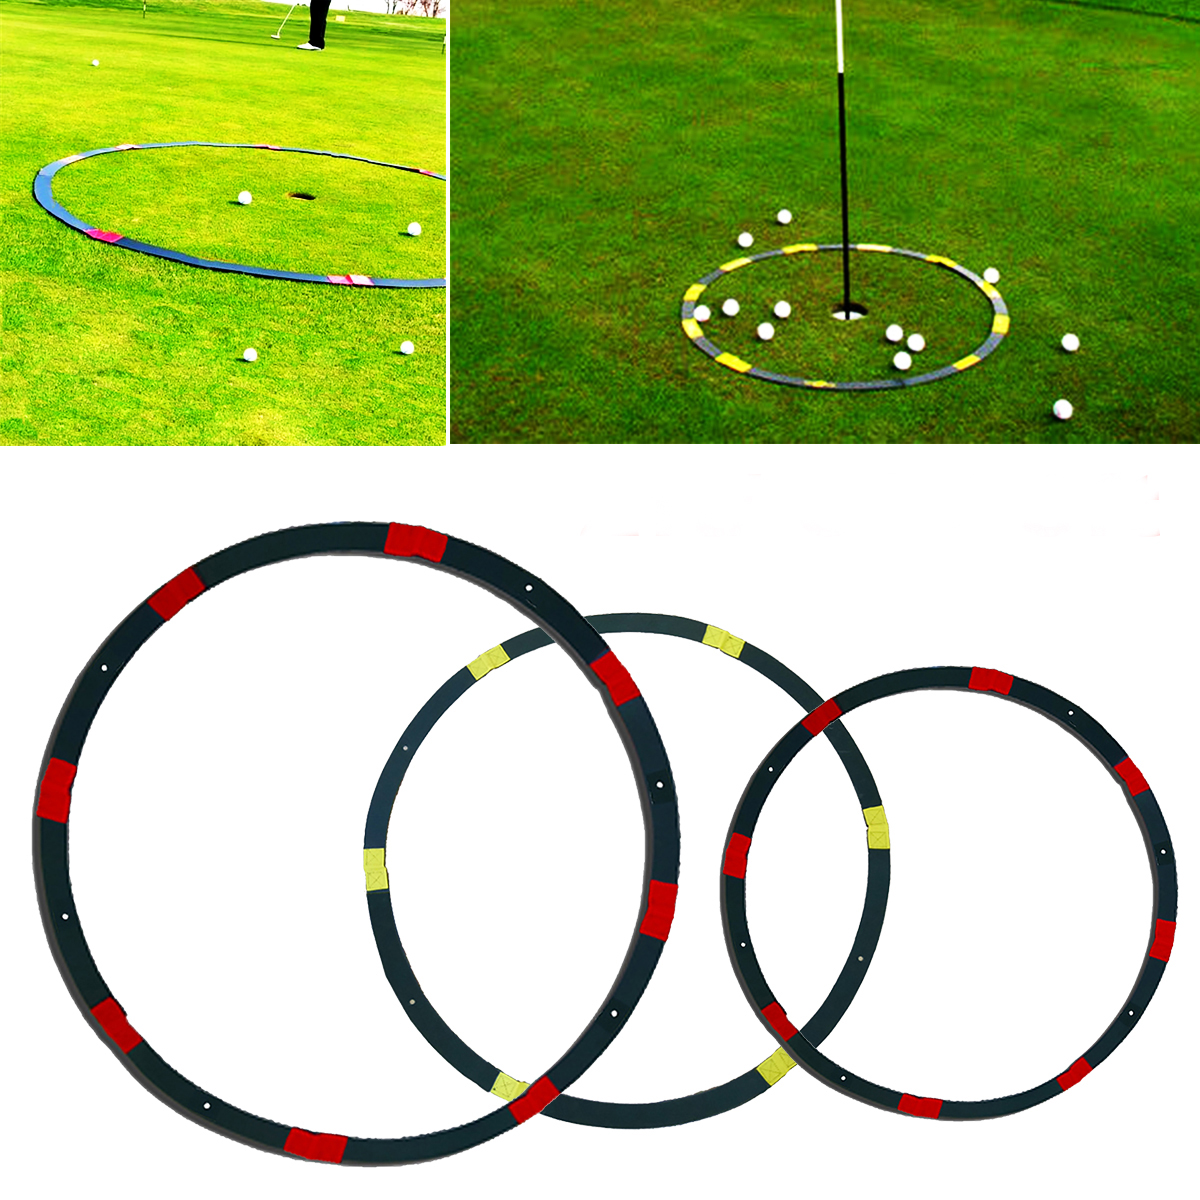 

2/3/6ft Portable Eyeline Golf Target Circle Sports Swing Training Aid Practice Golf Tool Accessories